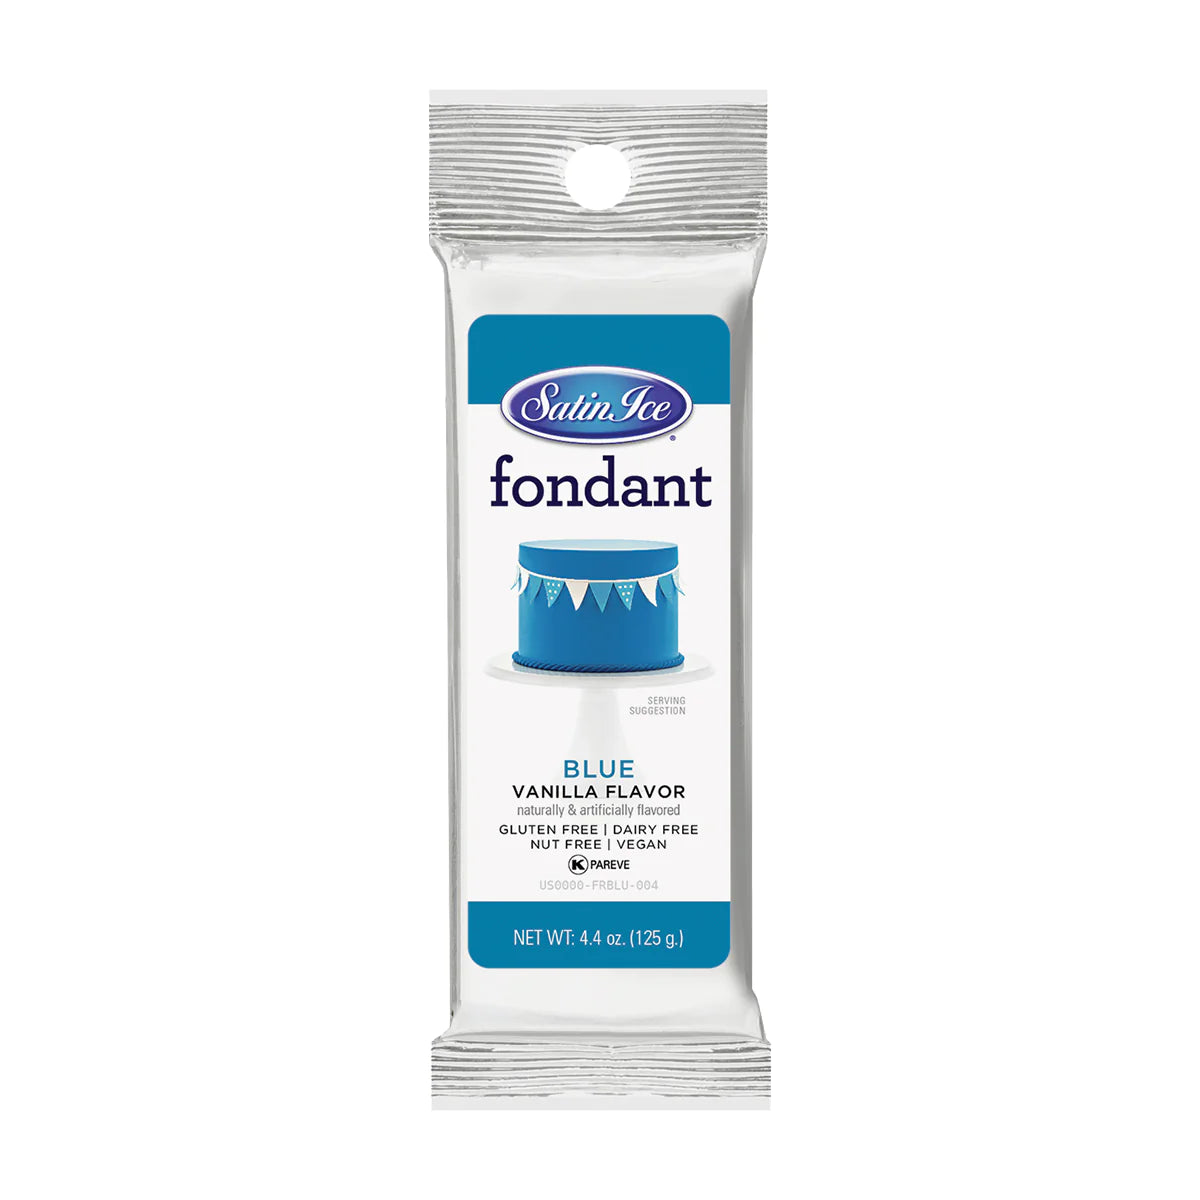 Blue Colored and Vanilla Flavored Fondant in a 4.4 Ounce Foil Pouch